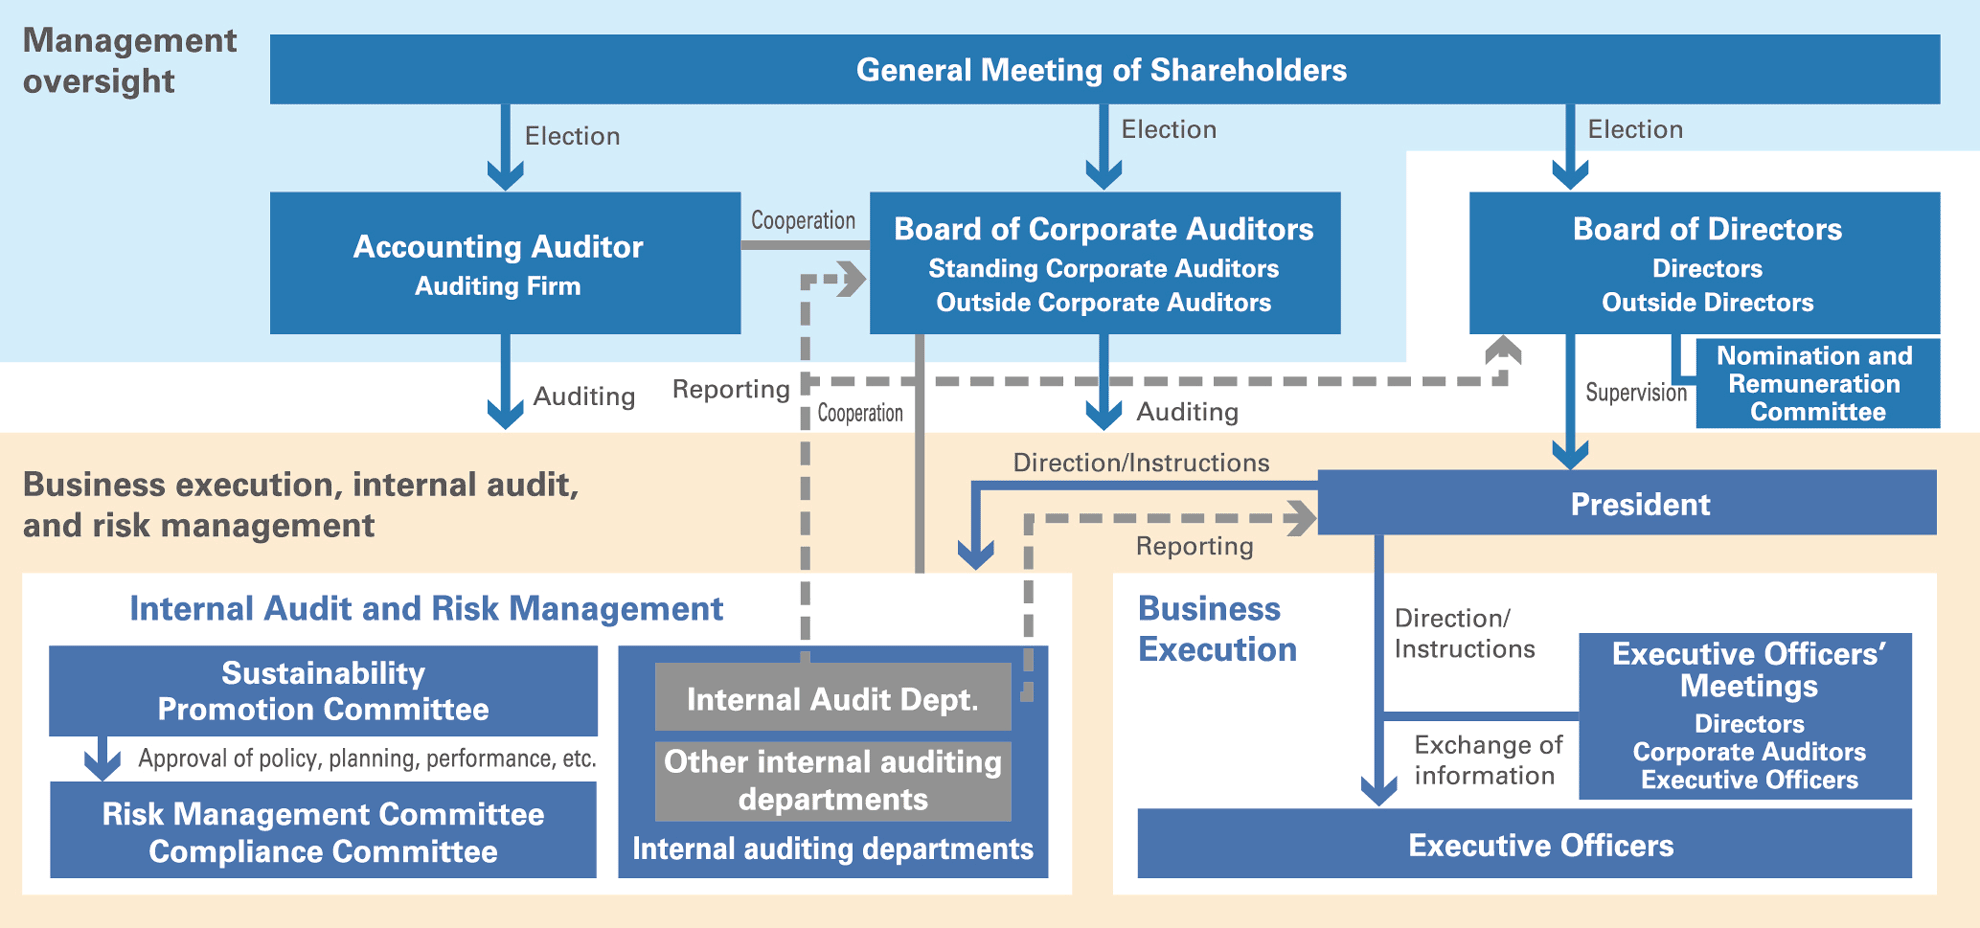 Structure of Corporate Governance